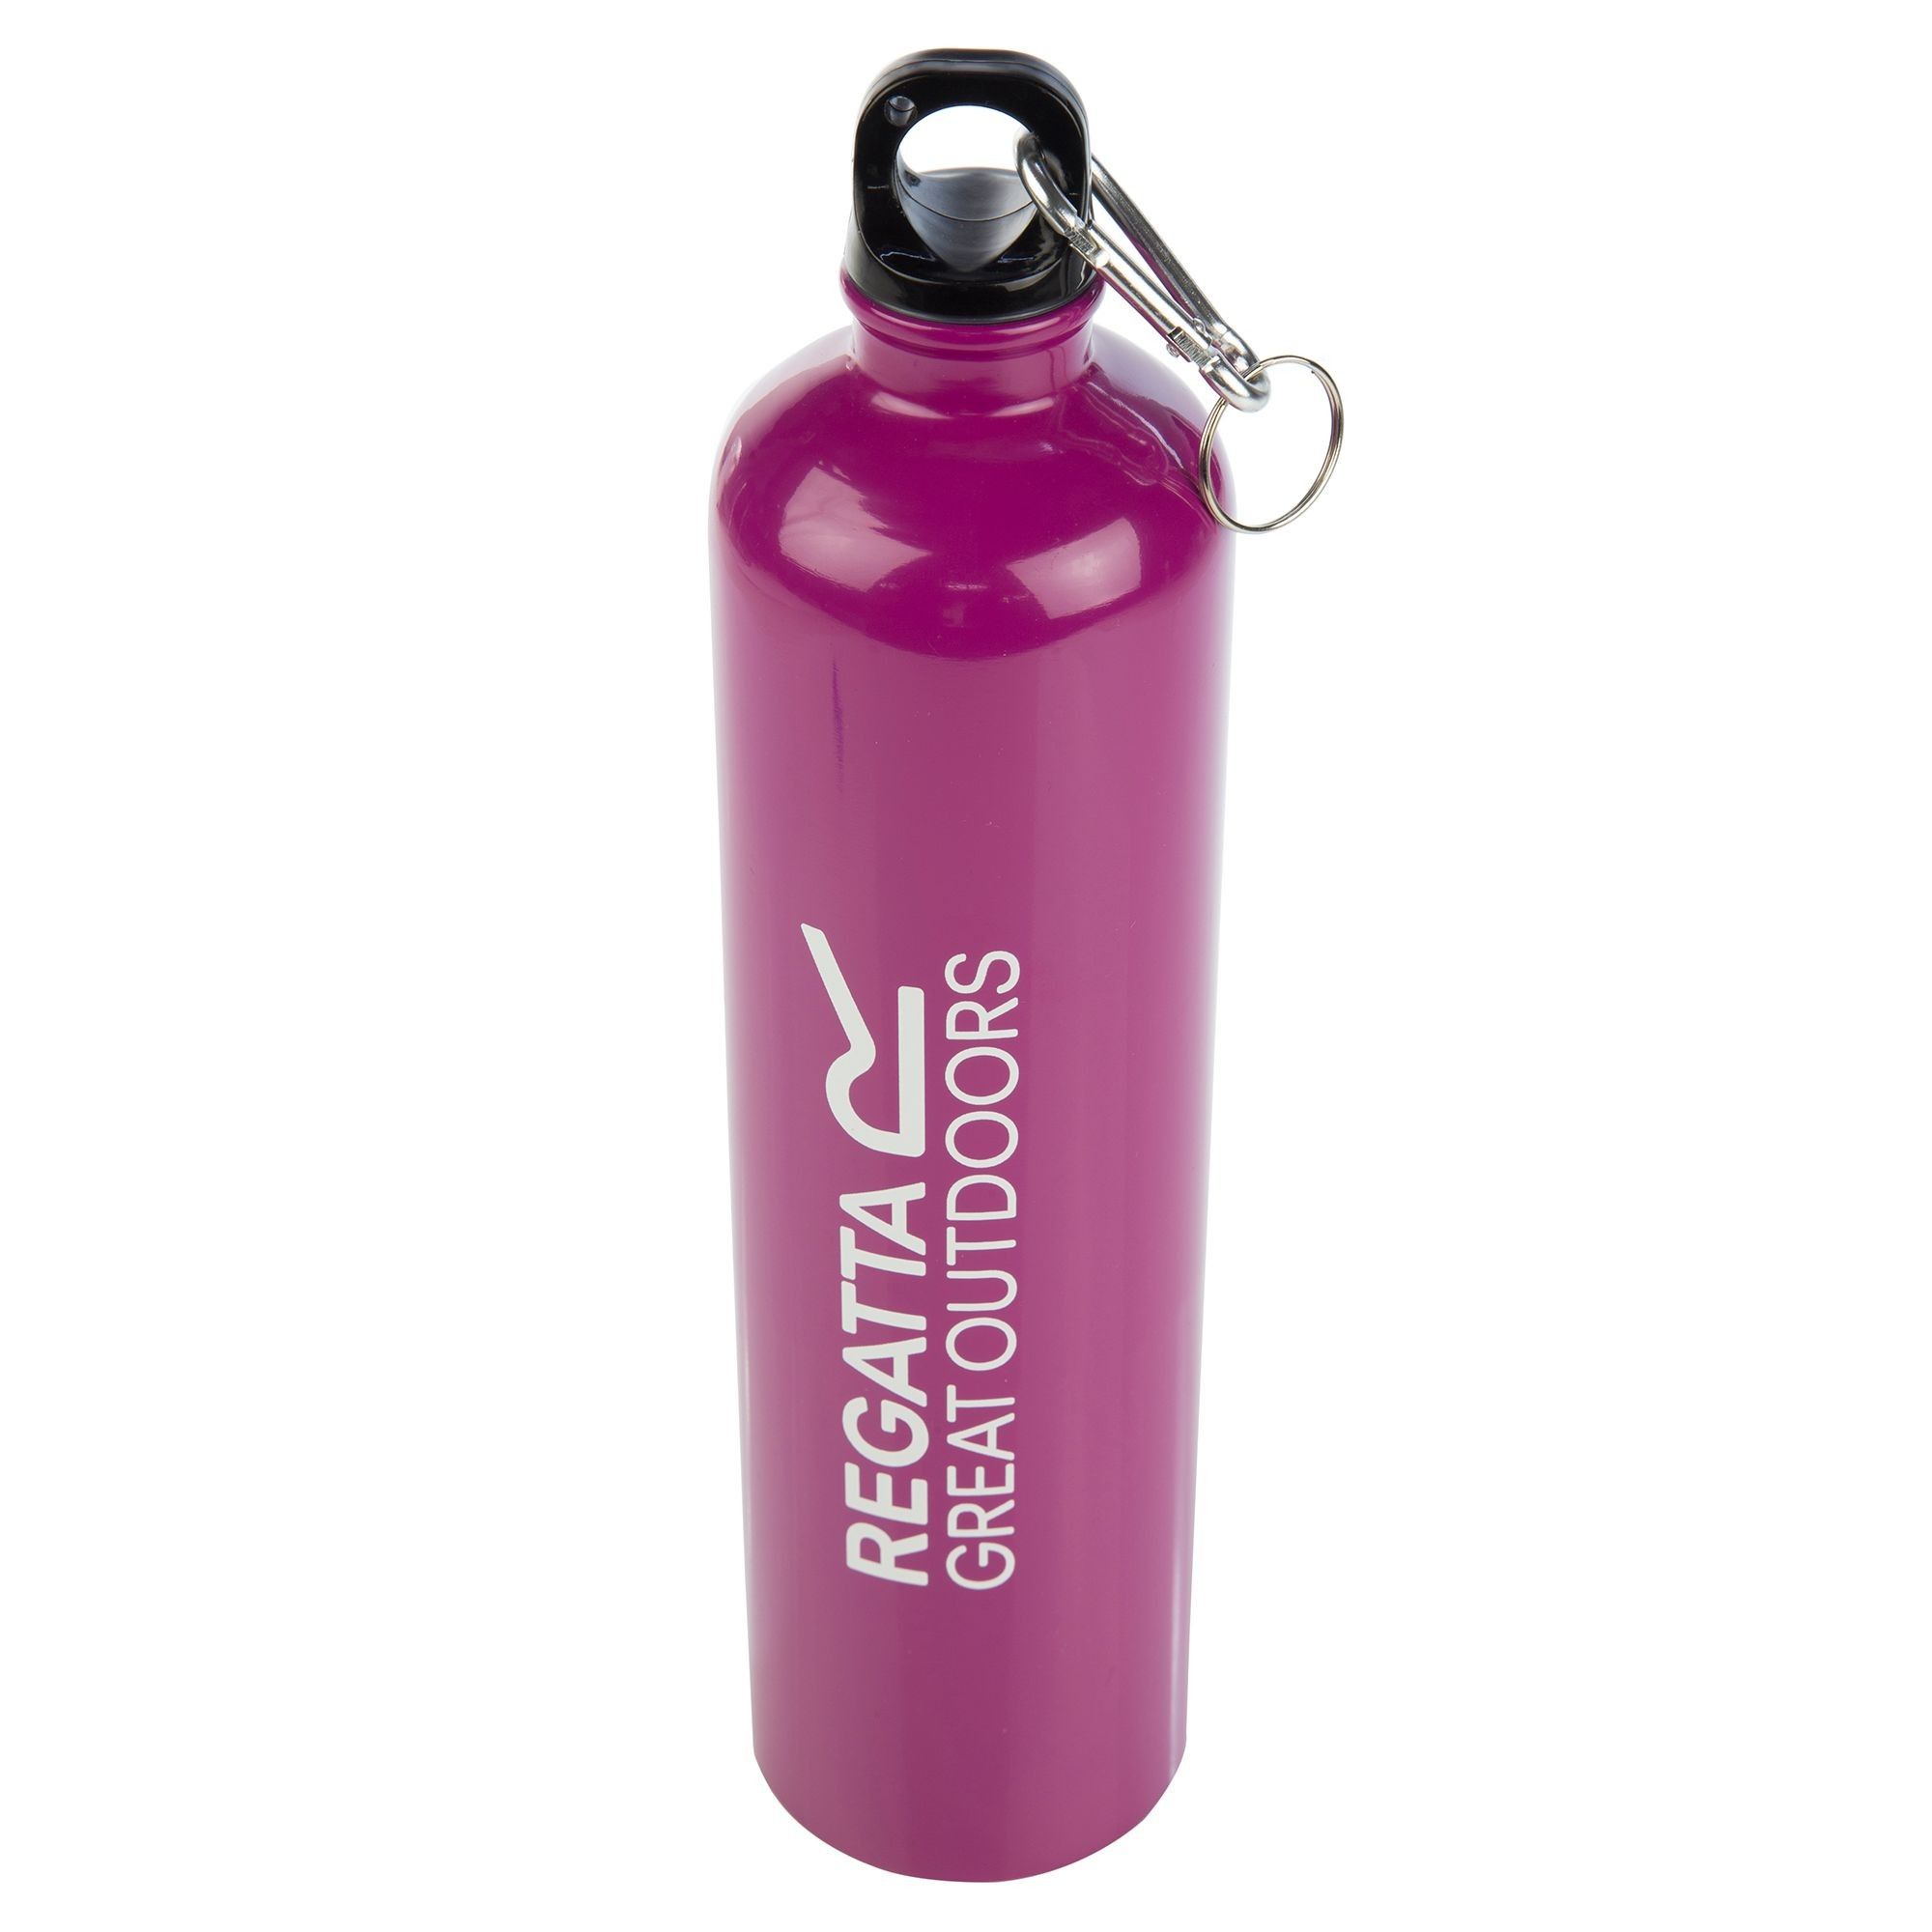 100% steel. 1 litre metal water bottle with a carabineer attachment to fix to backpacks or day bags. Ideal for camping and outdoor adventures.